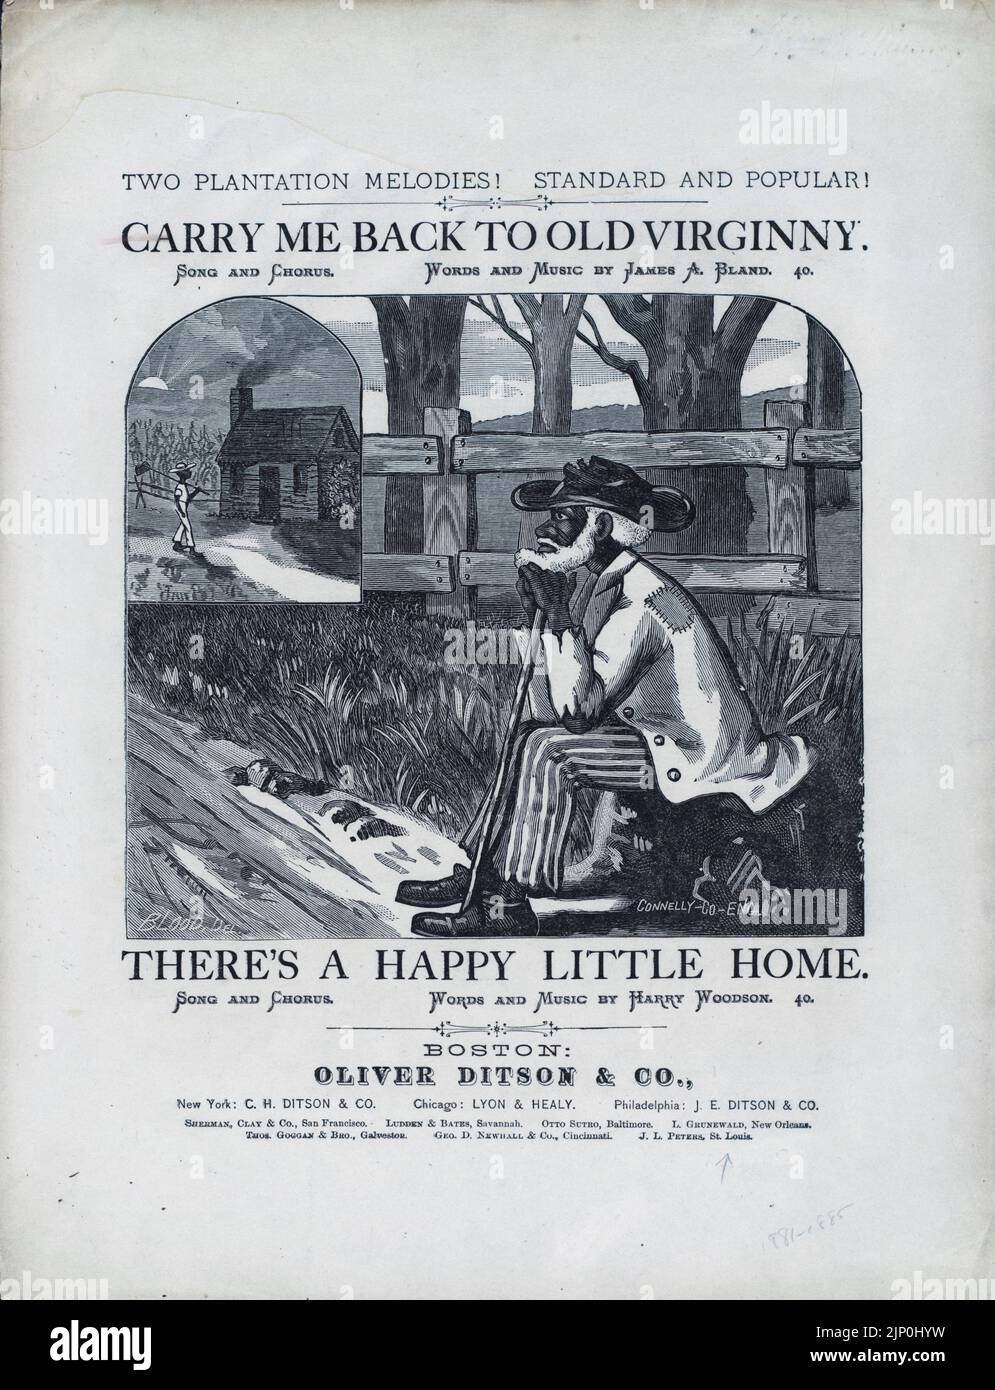 Carry Me Back to Old Virginy, Words and Music von James A. Bland, and There's A Happy Little Home, Words and Music von Harry Woodson, Two Plantation Melodies, Published by Oliver Ditson and Company (1878) Cover-Illustration für Noten von Connelly Co Stockfoto